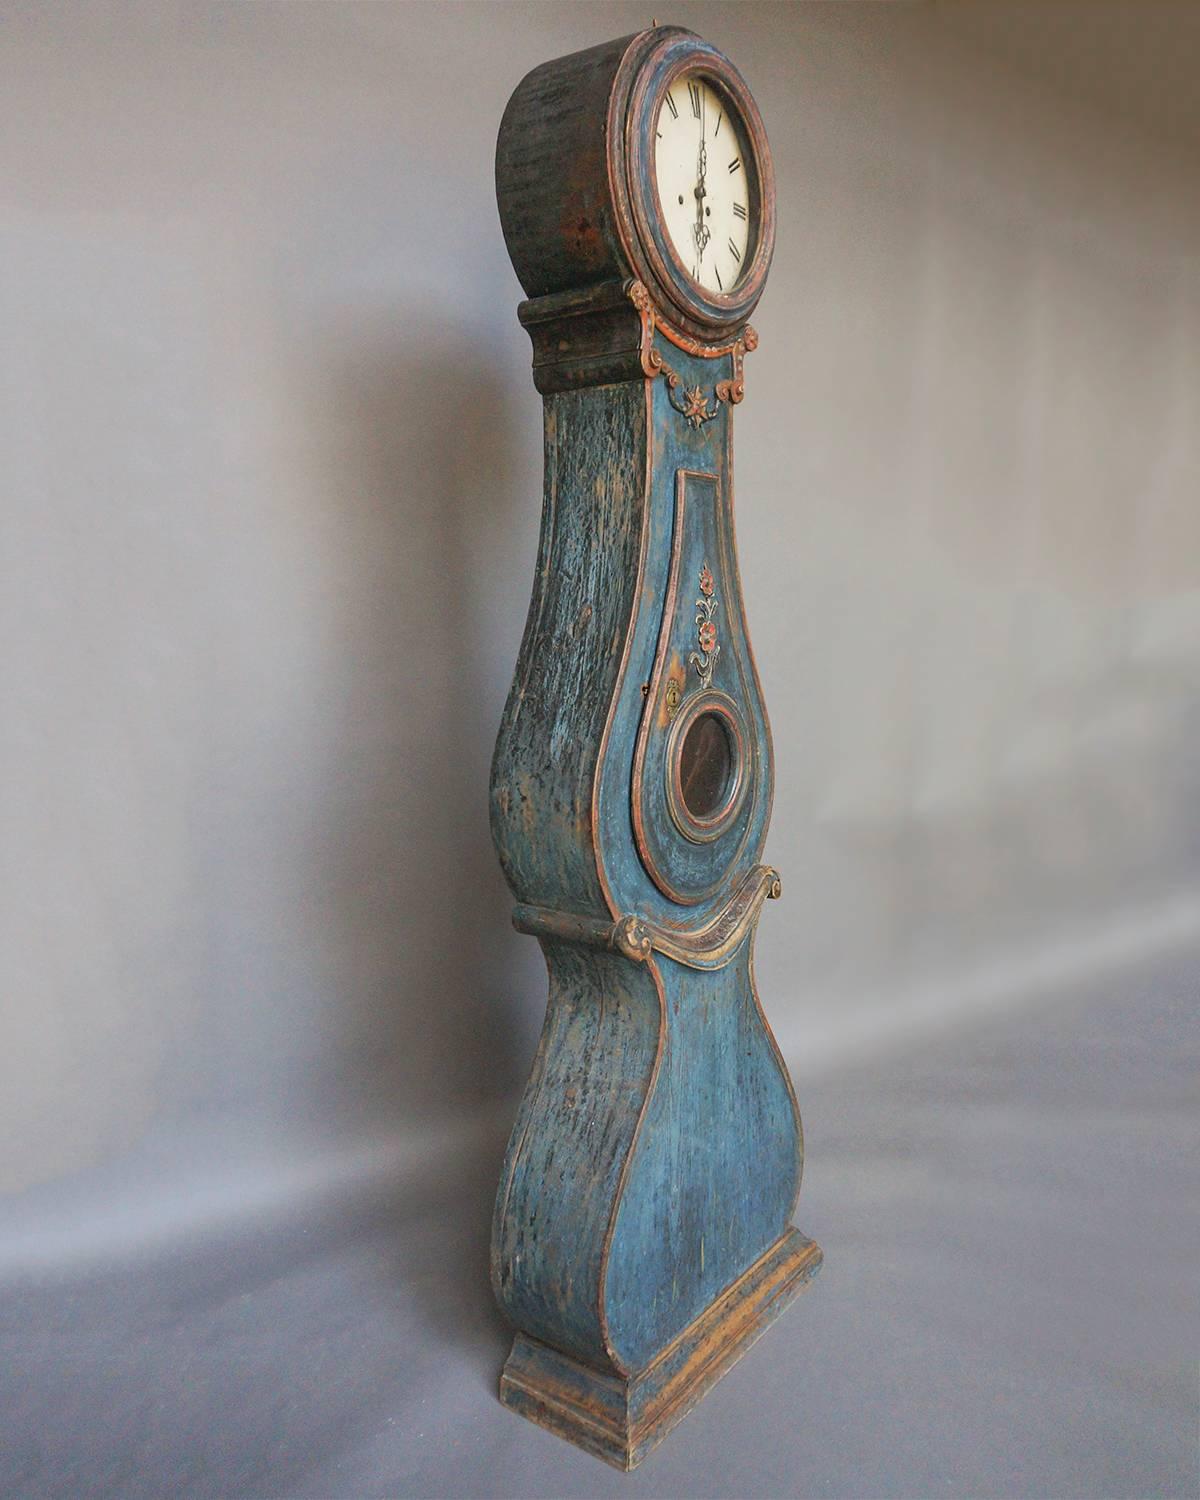 Beautifully carved and painted tall case clock from Fryksdalen, Värmland, Sweden. Just below the face is carved detail reminiscent of a garland of flowers. Roses decorate the middle of the case and below the “belly” of the clock is a carved band